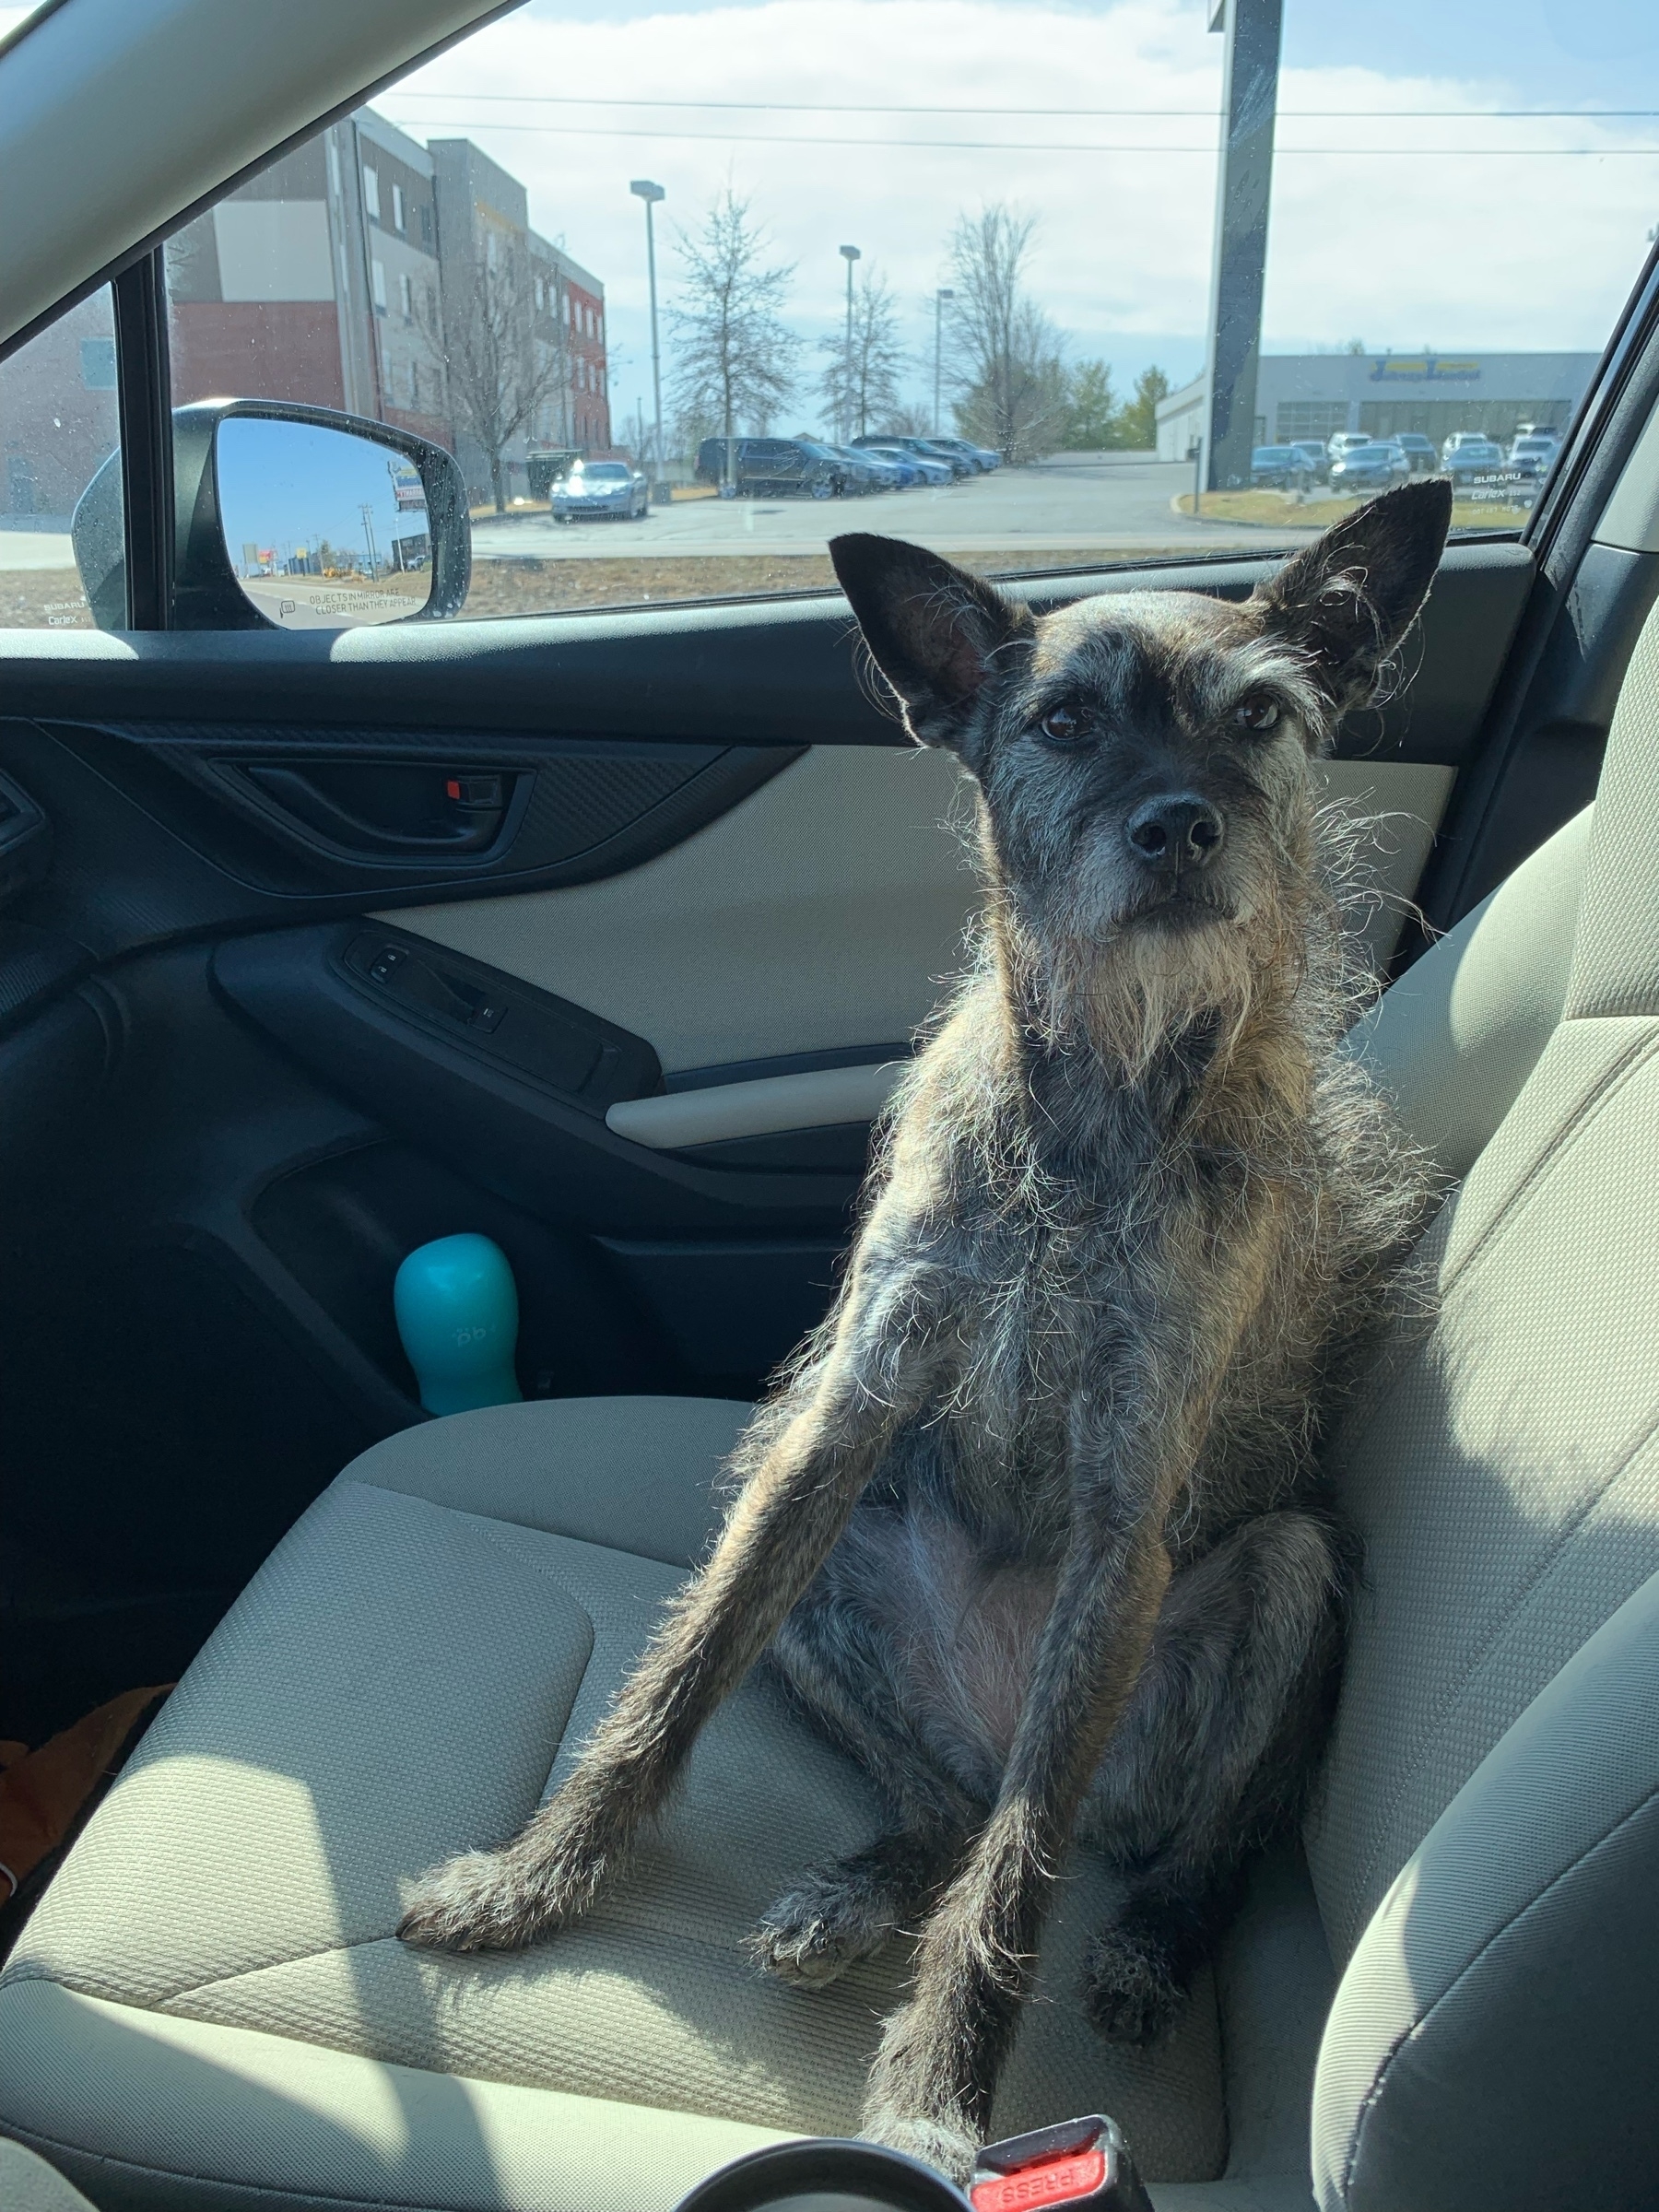 my dog Wednesday sitting on her butt facing towards the drivers seat in the front seat of my car